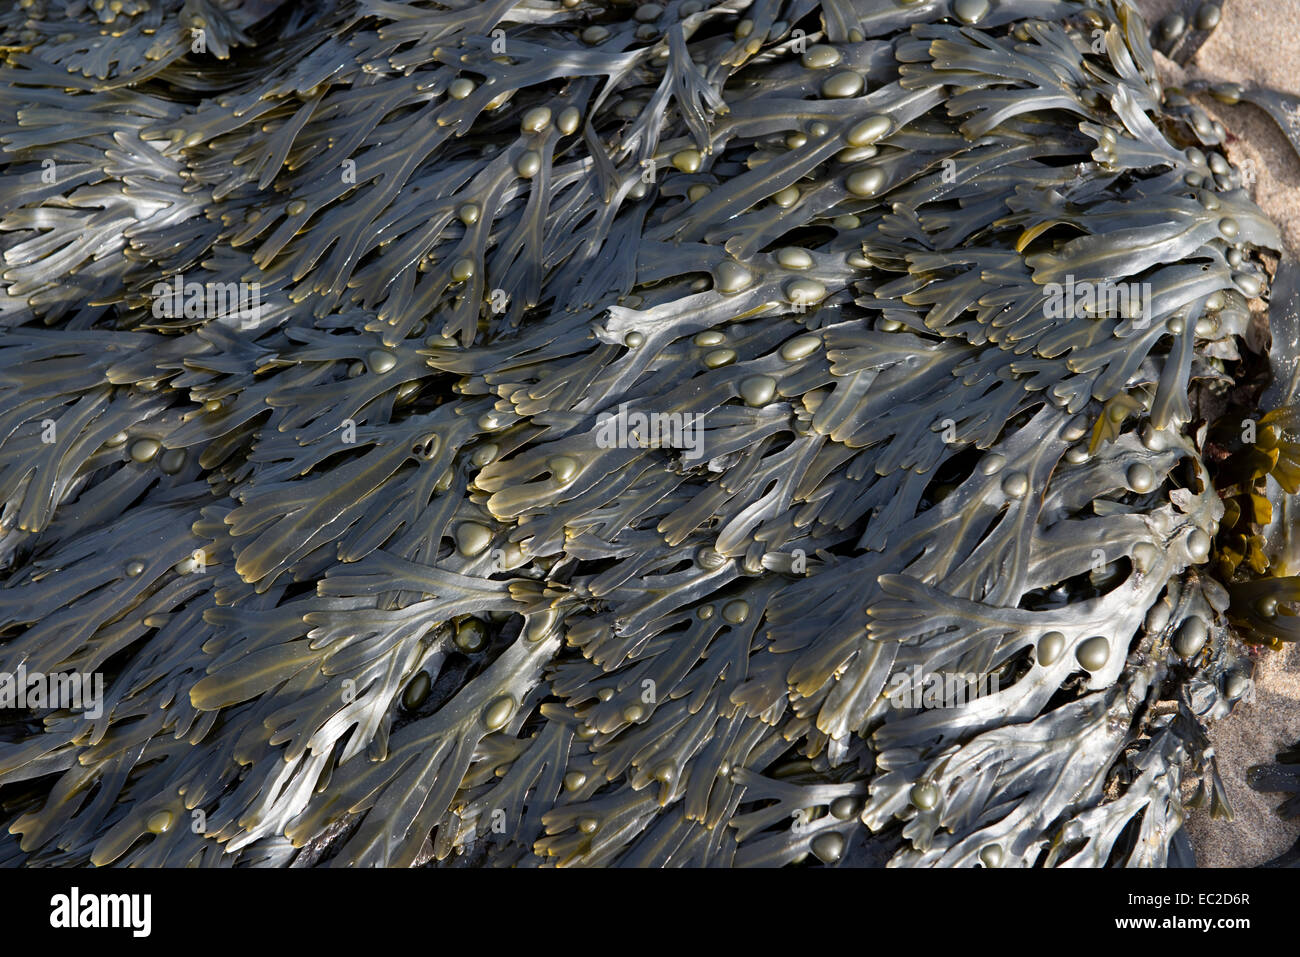 Bladder wrack, Fucus vesiculosus, algal seaweed on the shore at low tide a medicinal plant containing a high iodine content Stock Photo